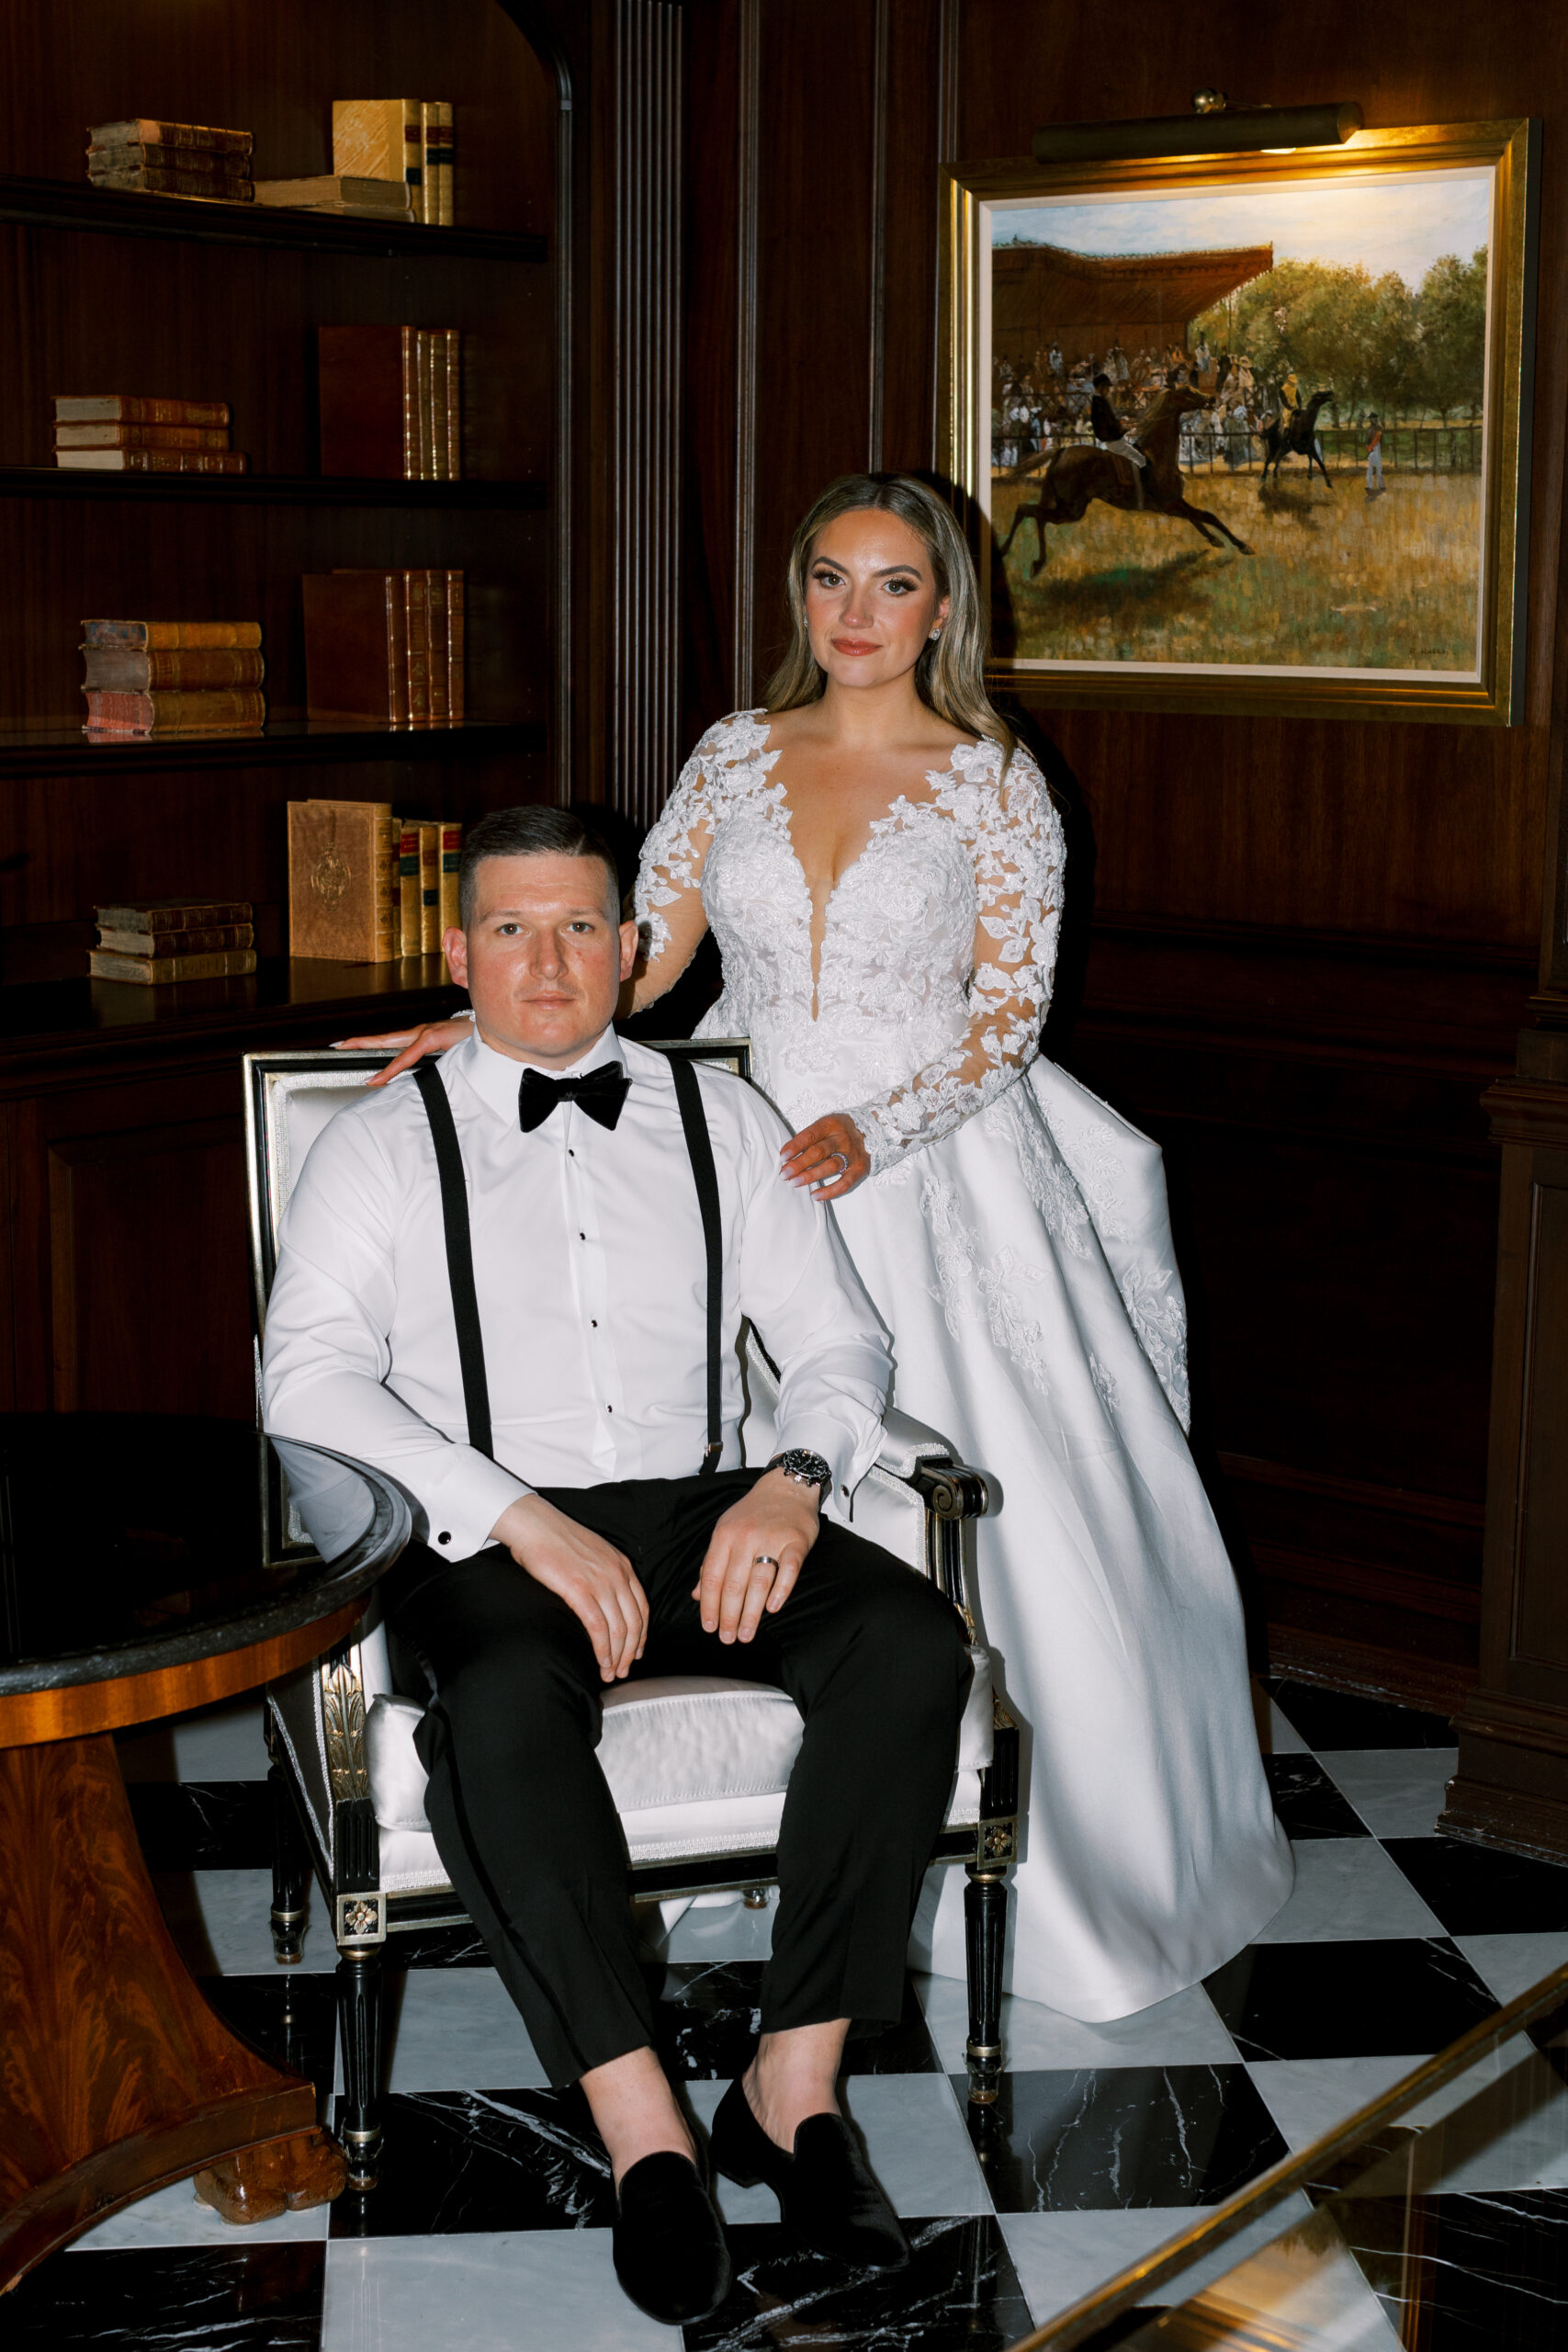 Timeless Park Chateau Wedding by Destination Film Wedding Photographer Katie Trauffer classic bride and groom portrait in dark library